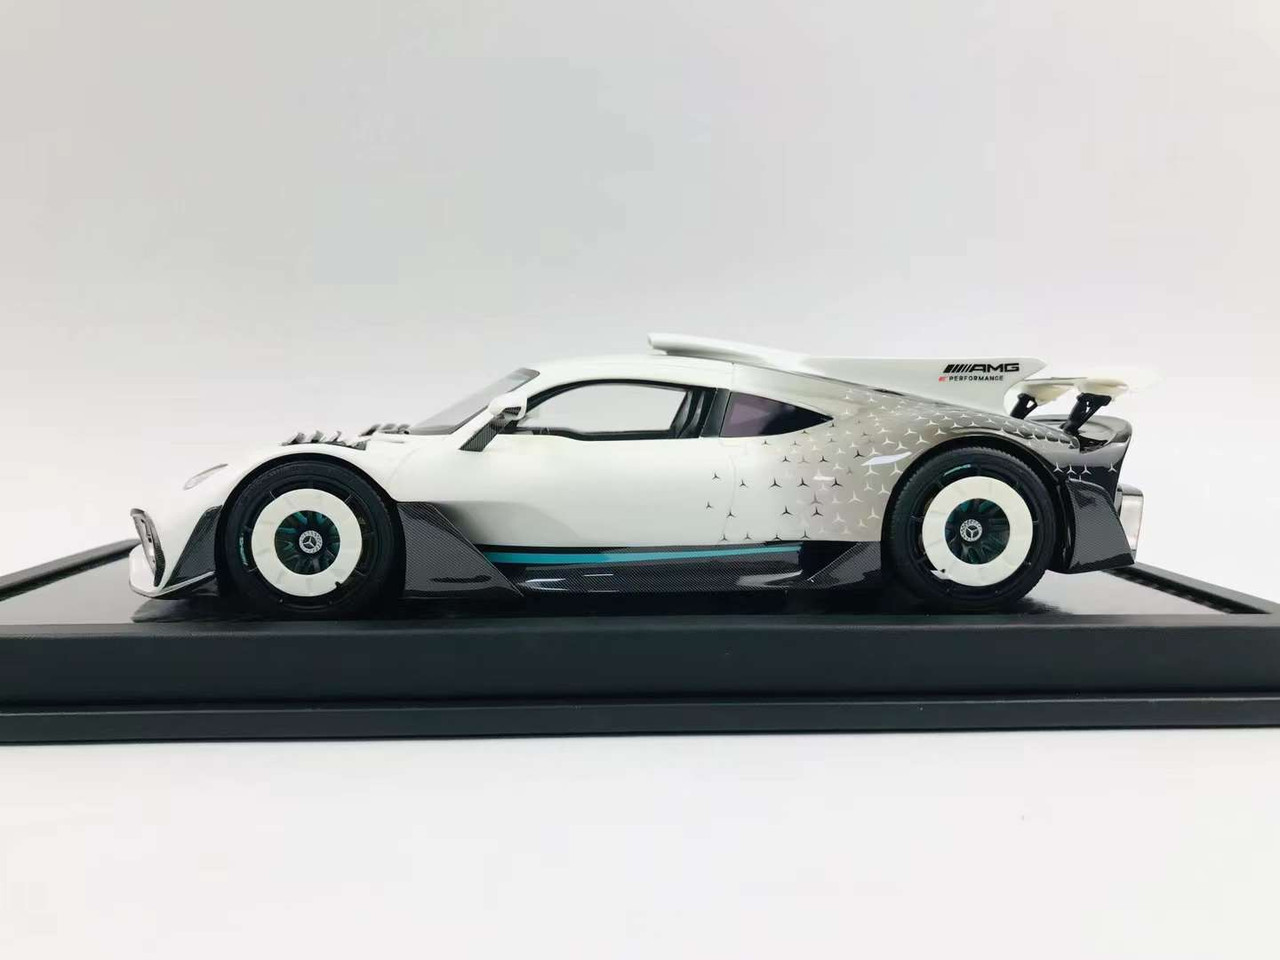 1/18 VIP Scale Models Mercedes-Benz AMG ONE (White & Glow in the Dark Green) Resin Car Model Limited 30 Pieces